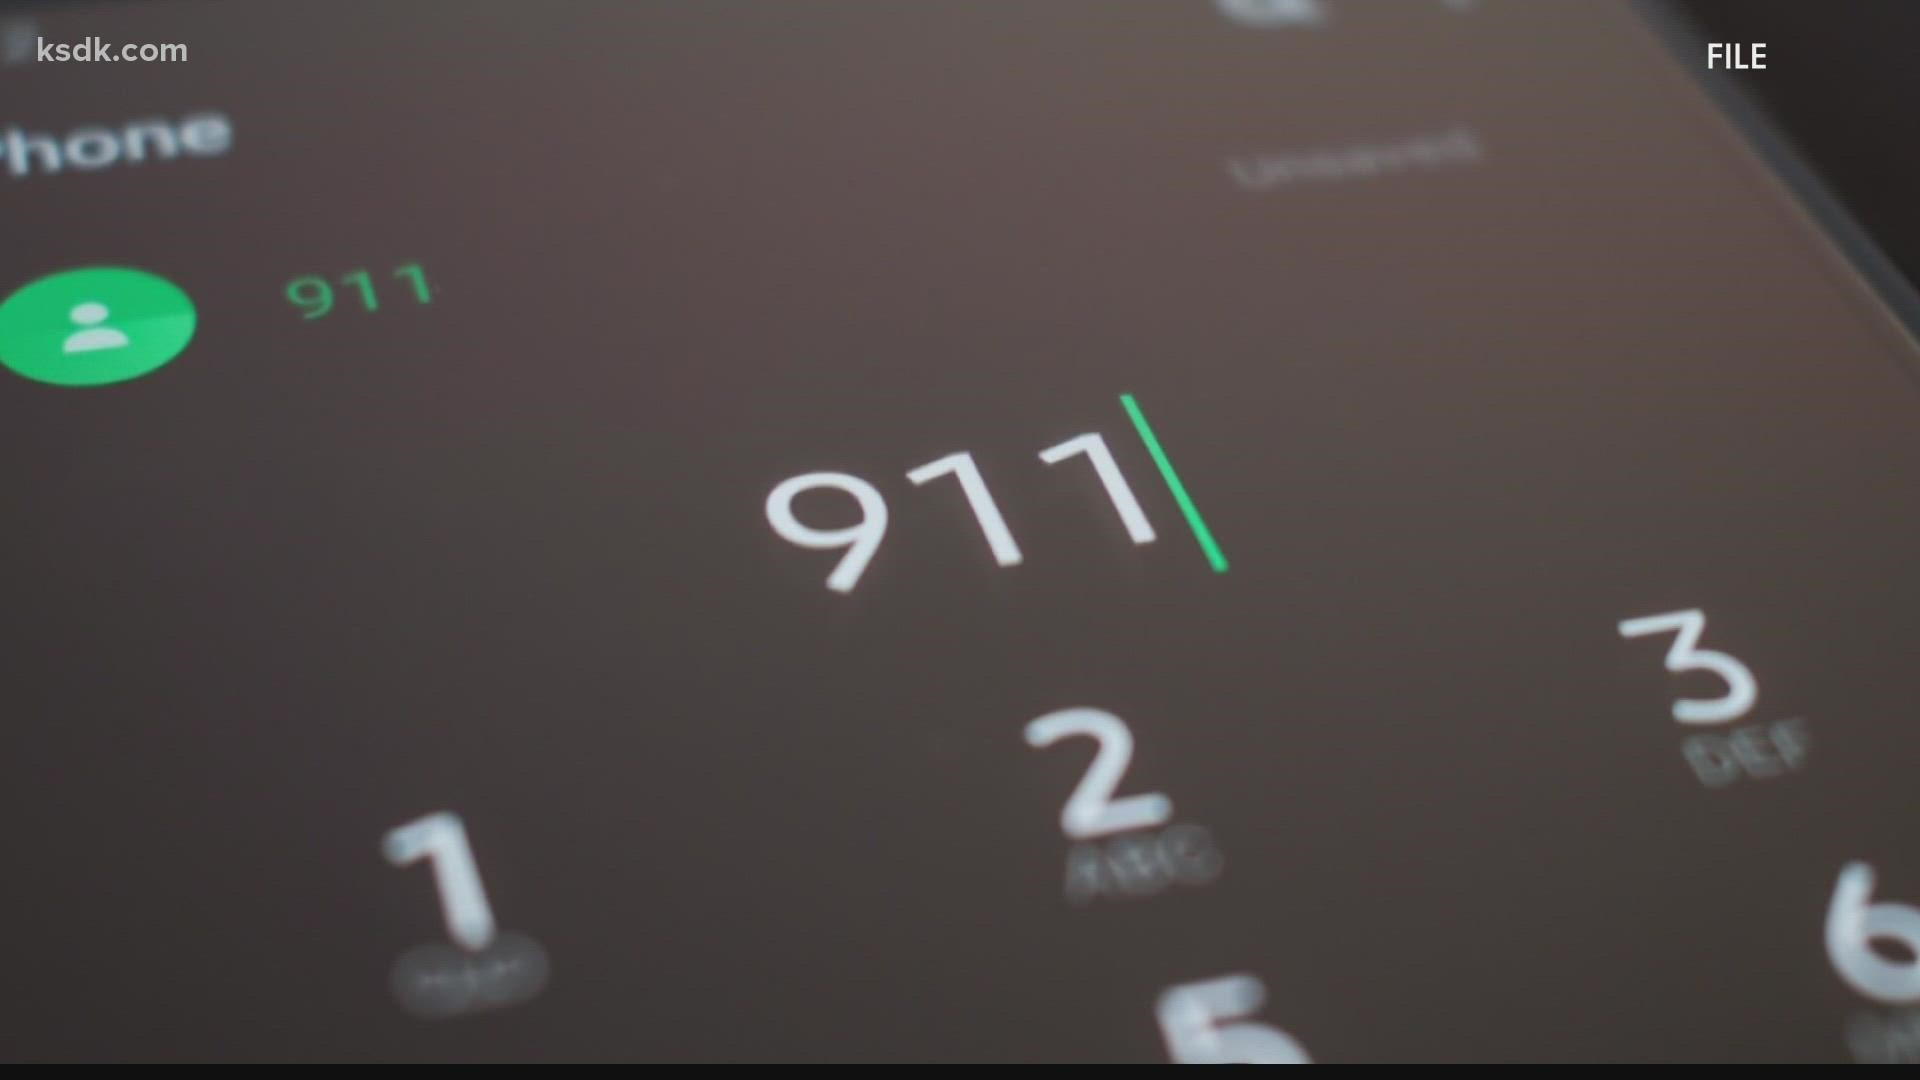 Downtown convenience store workers say all of their calls to 911 kept going to voicemail.